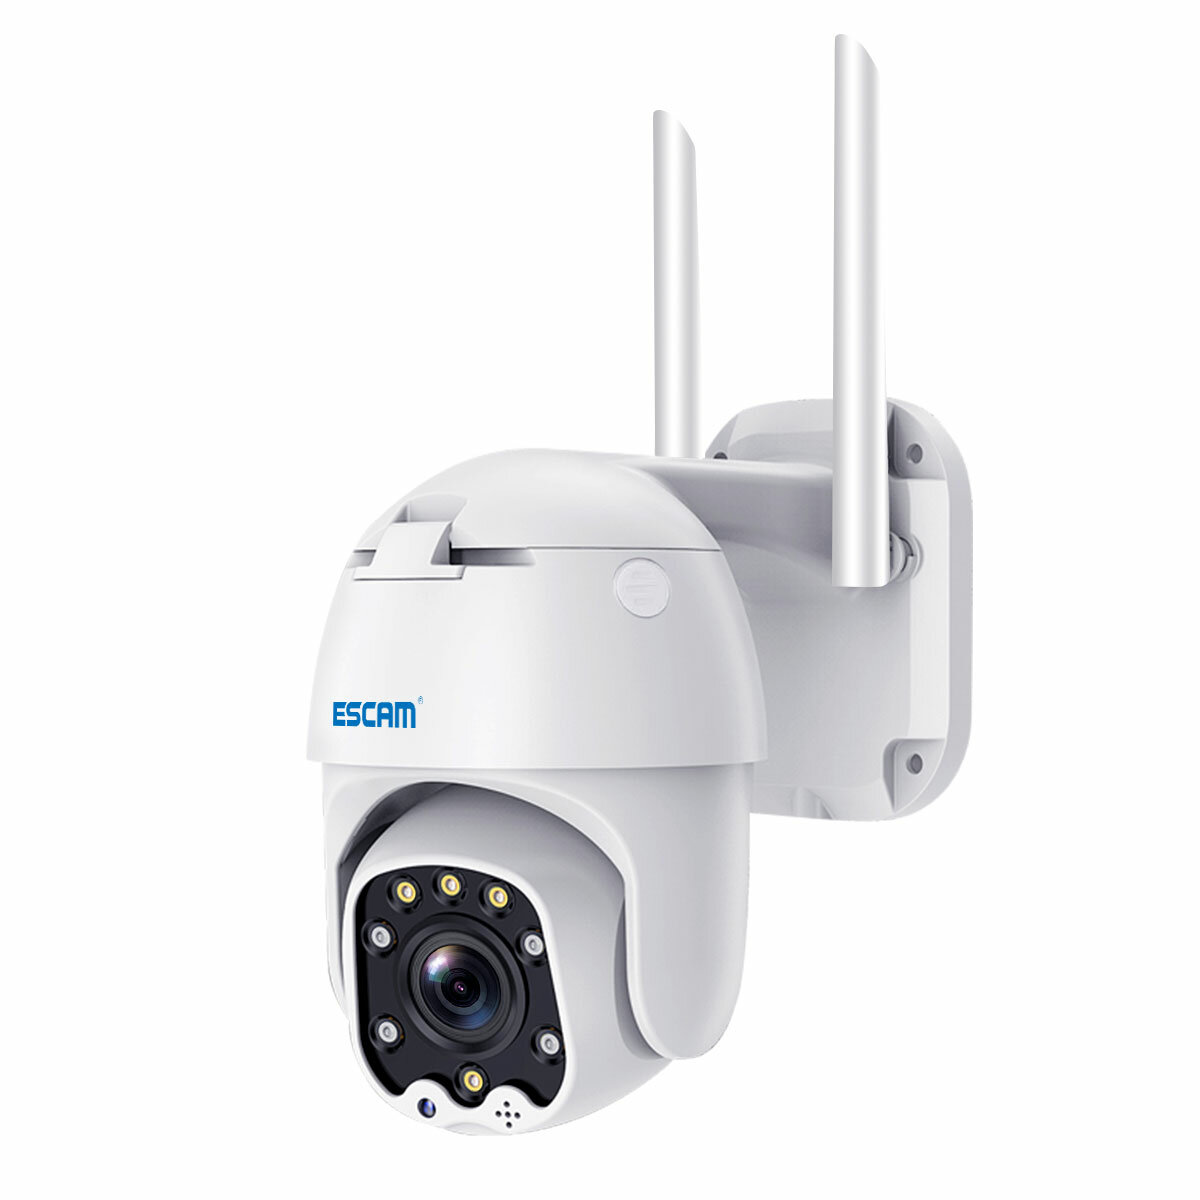 Image of ESCAM QF288 3MP Pan/Tilt 8X Zoom AI Humanoid detection Cloud Storage Waterproof WiFi IP Camera with Two Way Audio